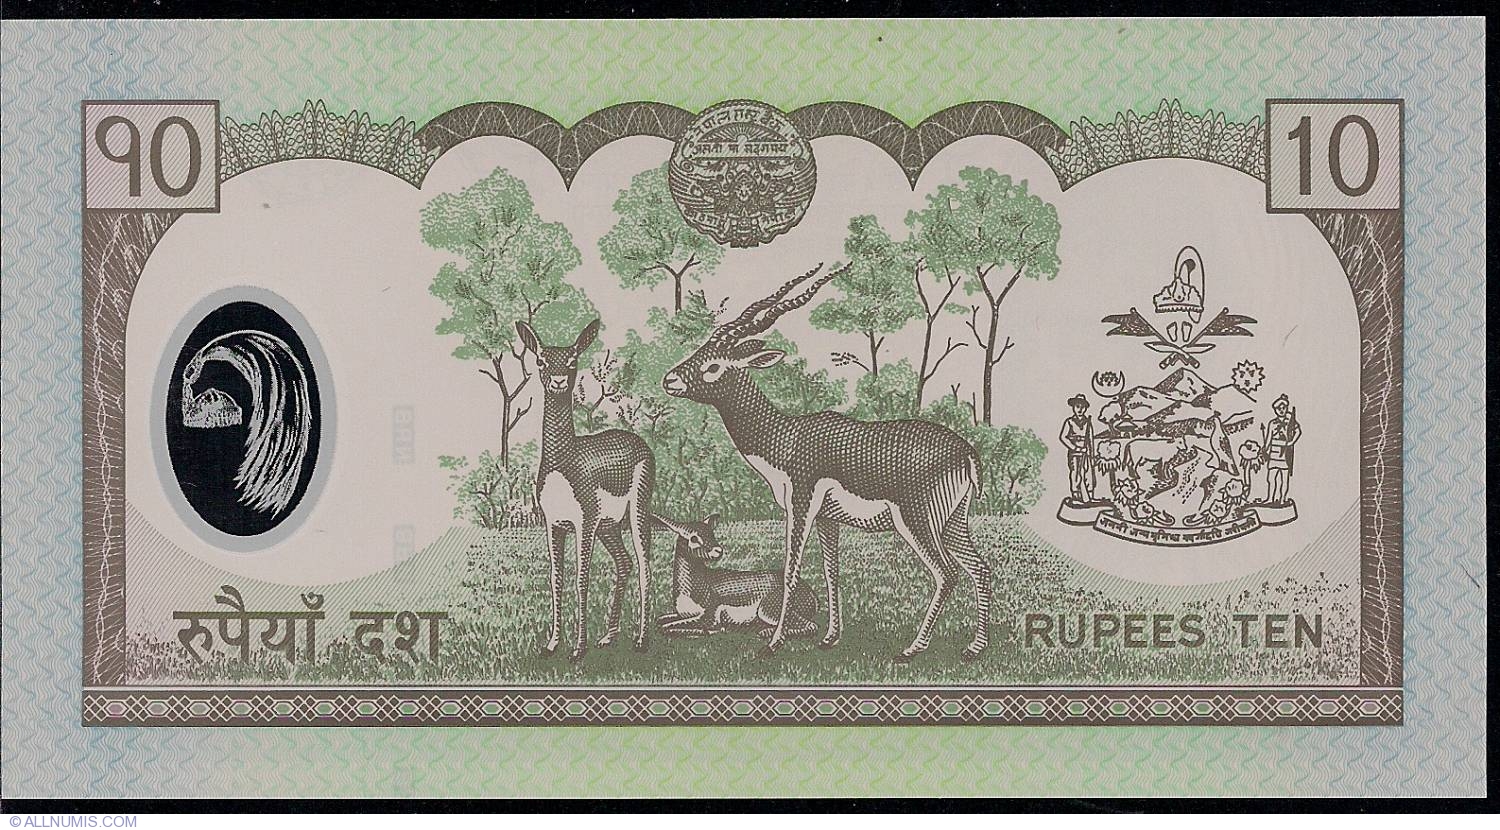 Nepal 10 Rupees ND 2005 Polymer P 54 UNC 